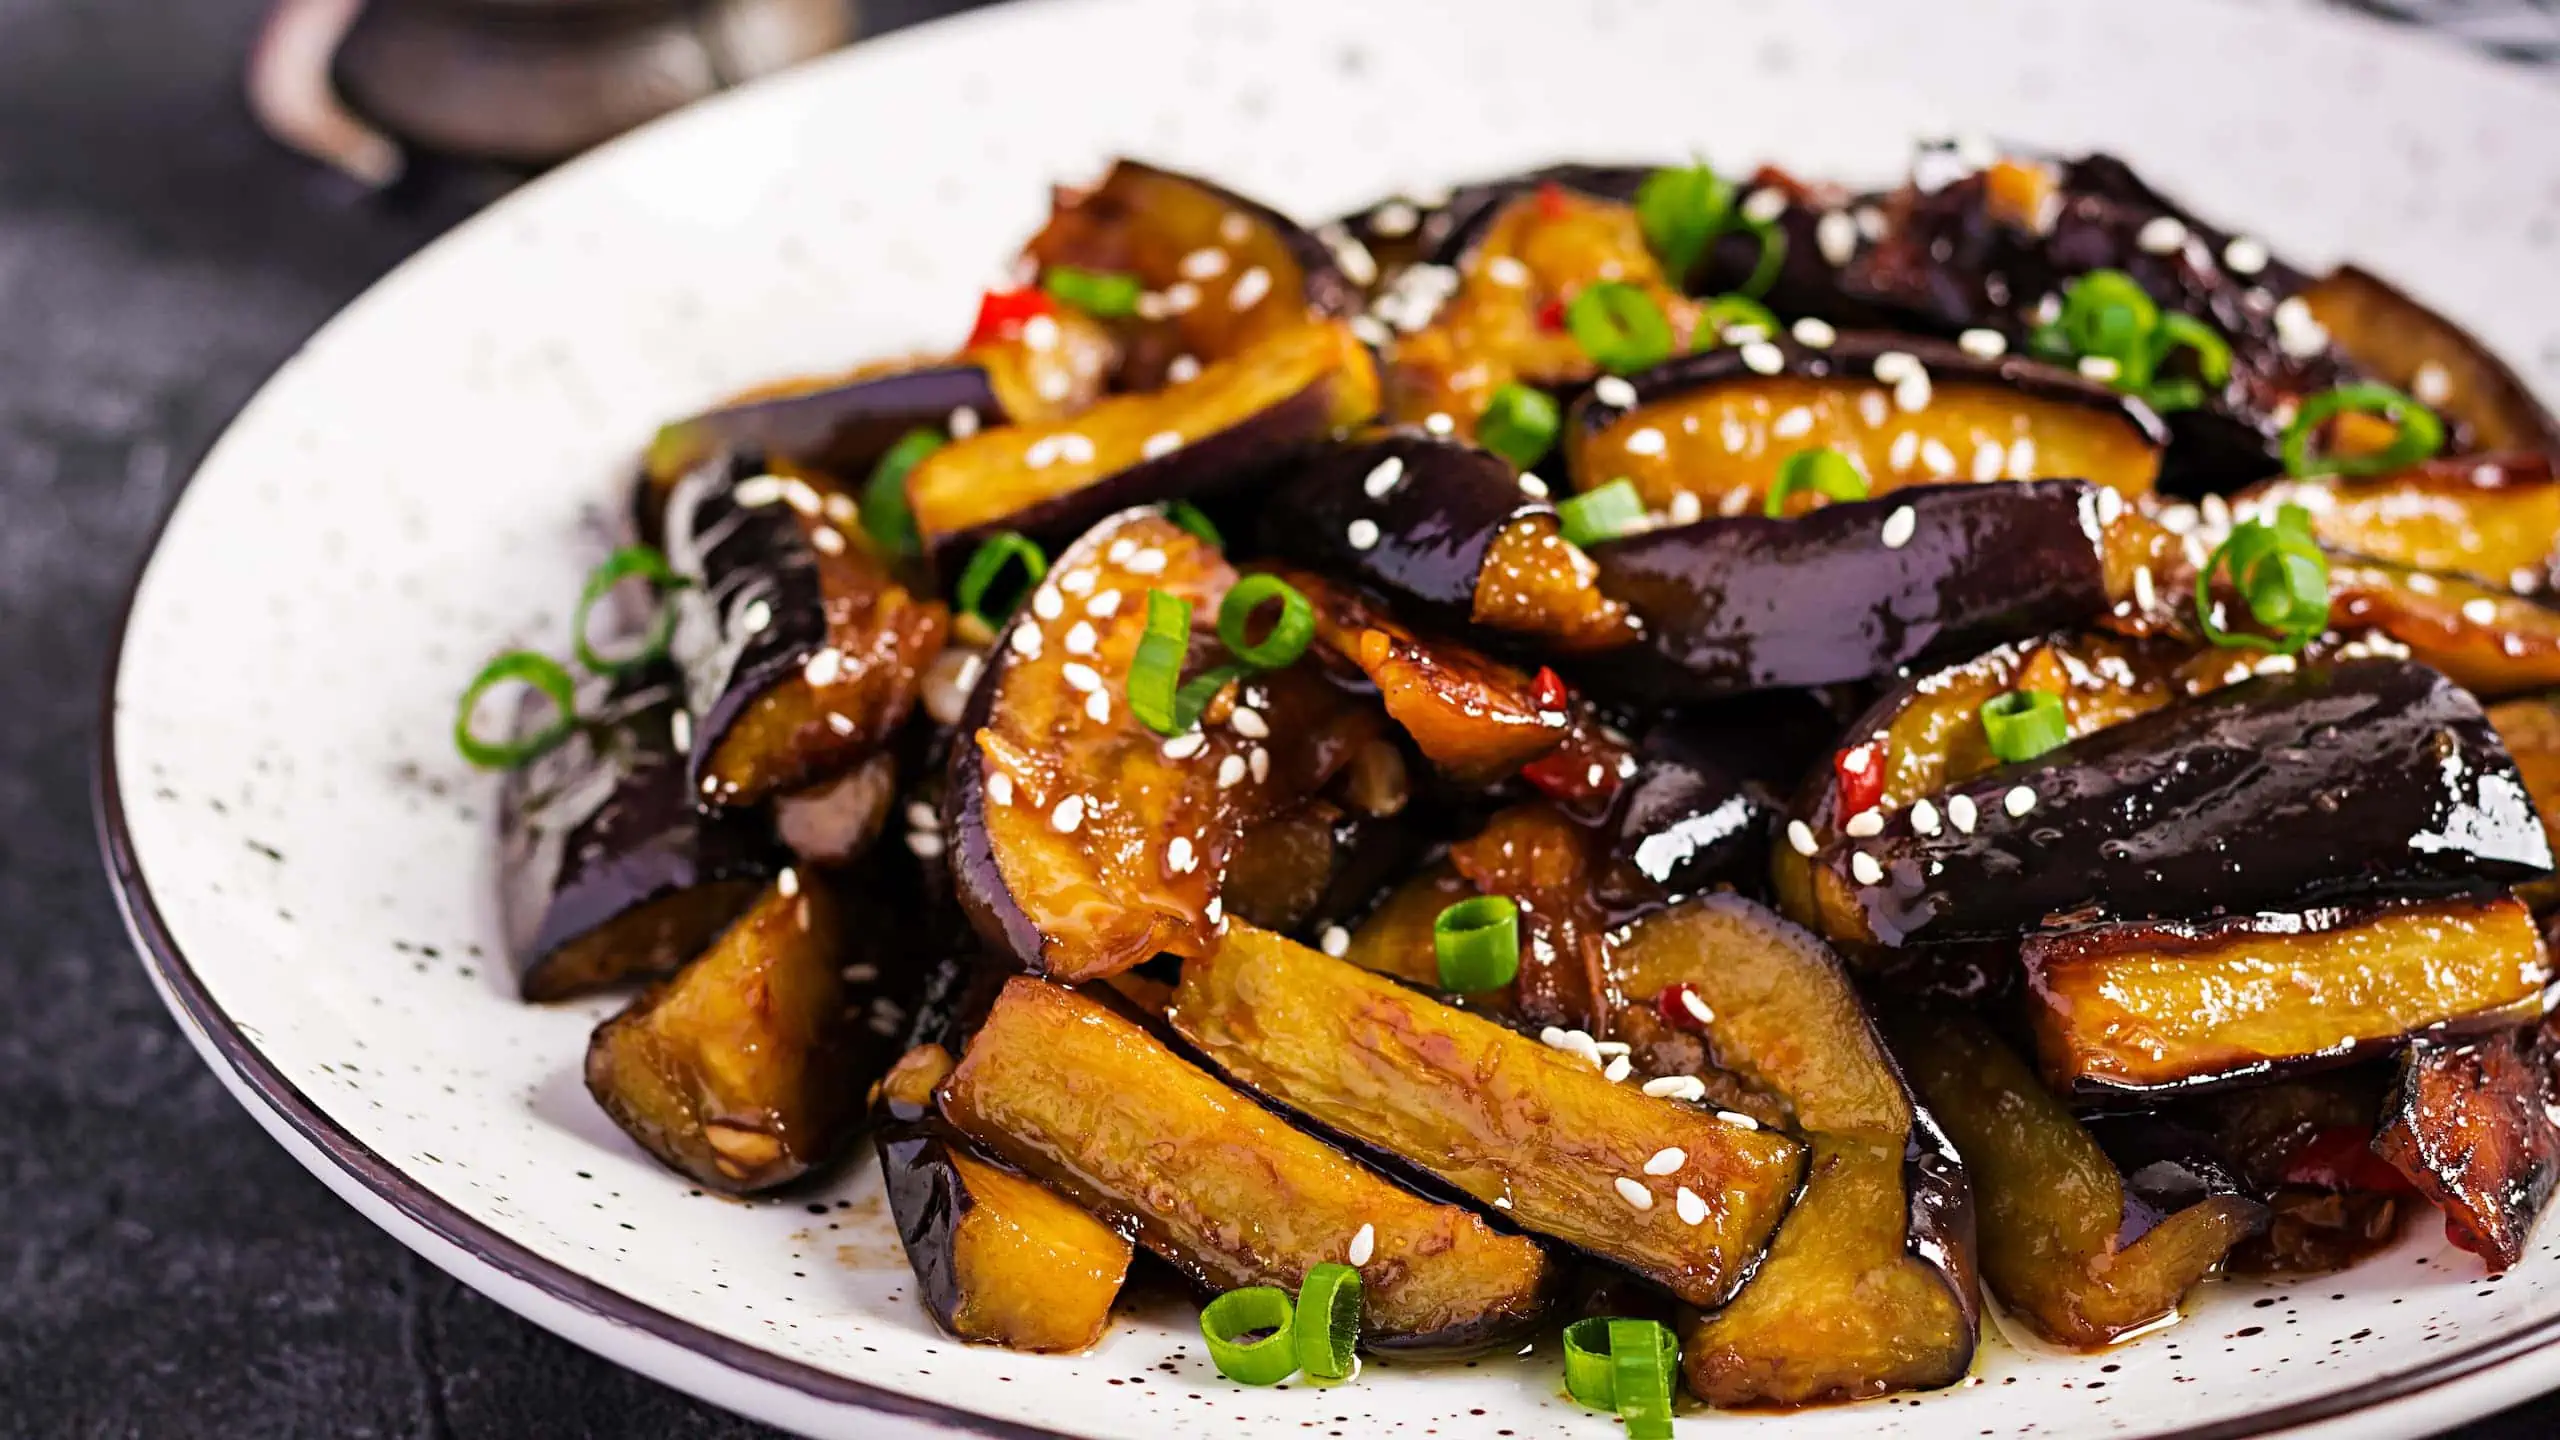 Our version of Japanese eggplant dish